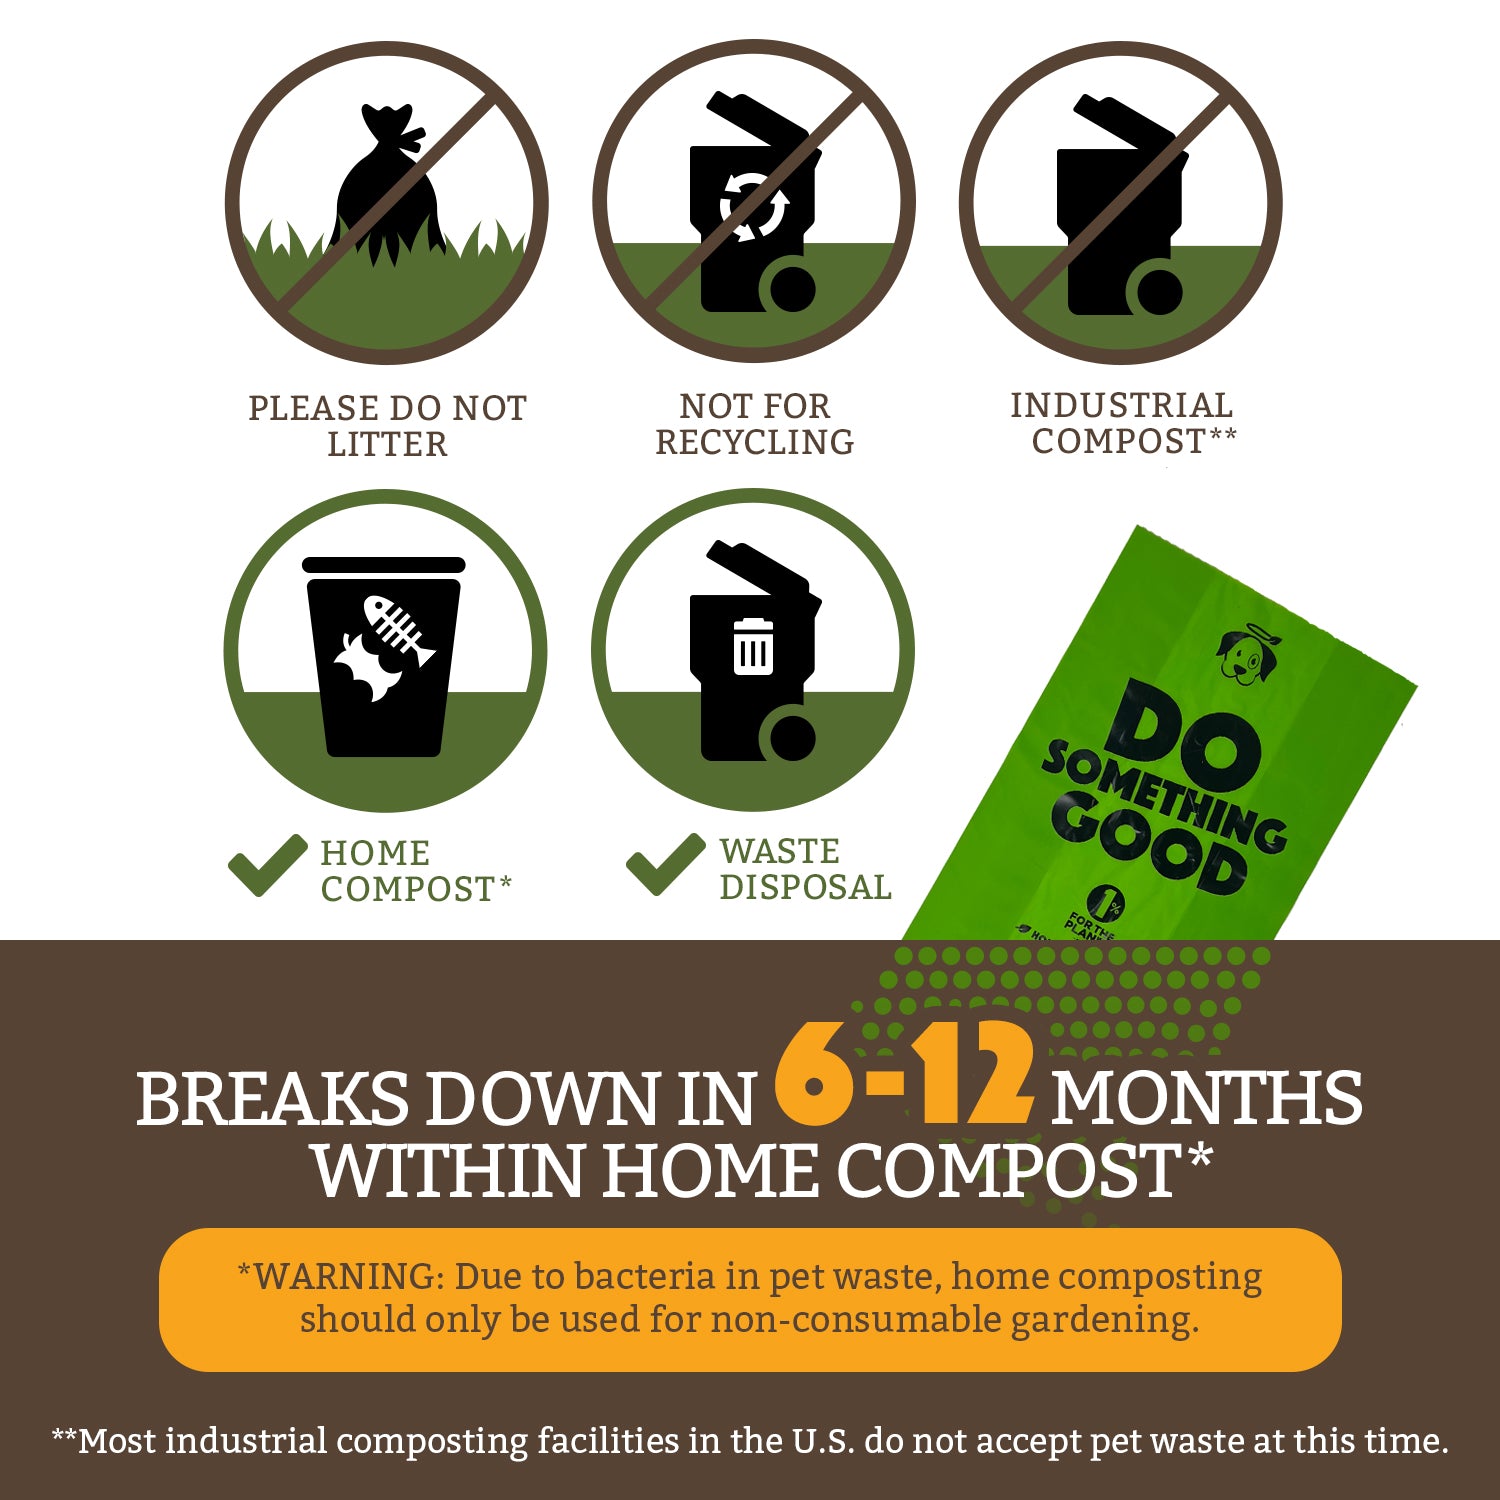 Compost Bags for Home Composting